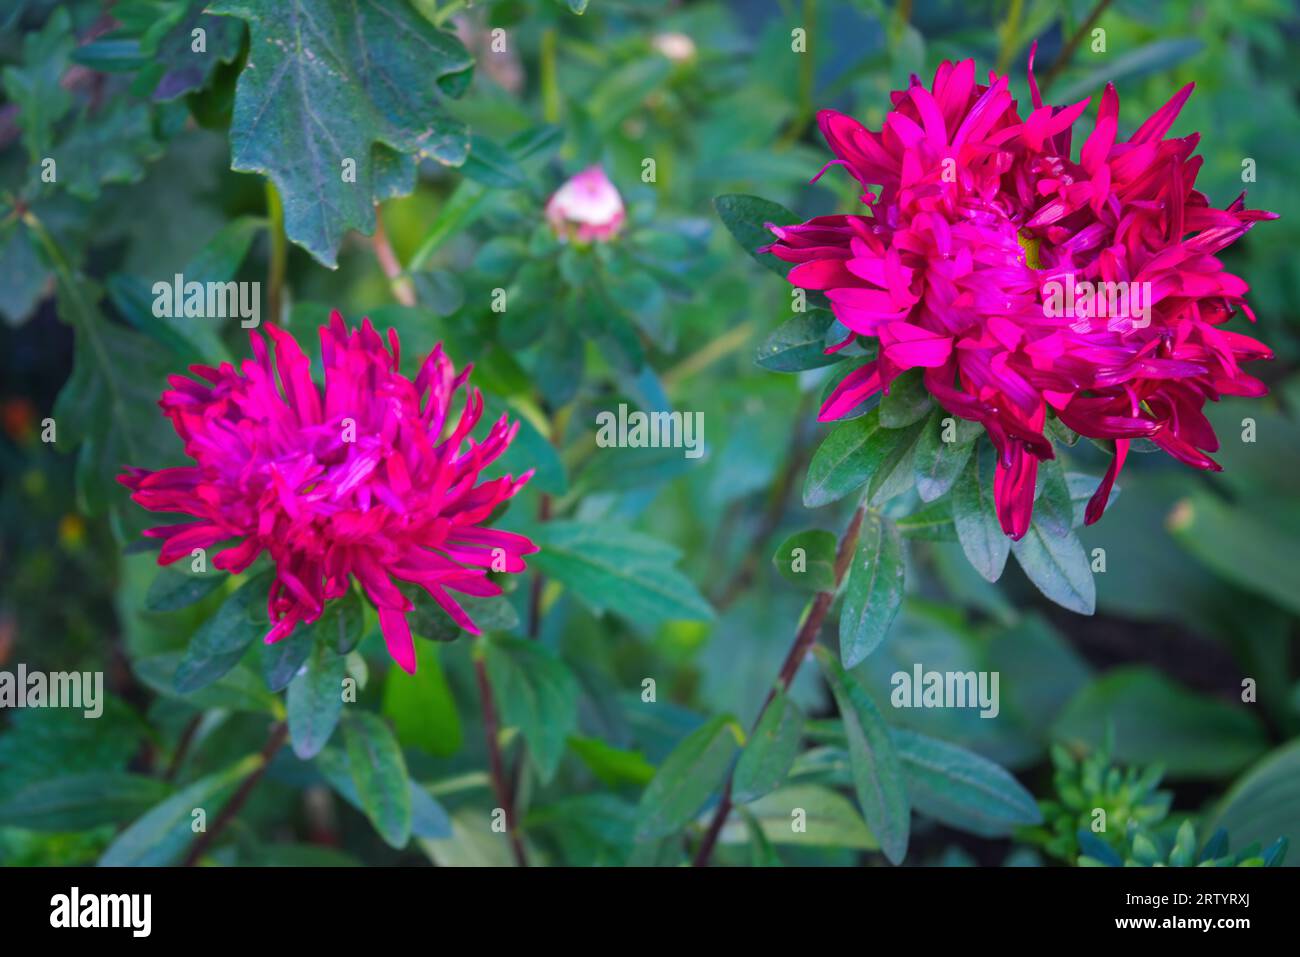 Chinese needle showy fuchsia aster in the garden close-up. Stock Photo